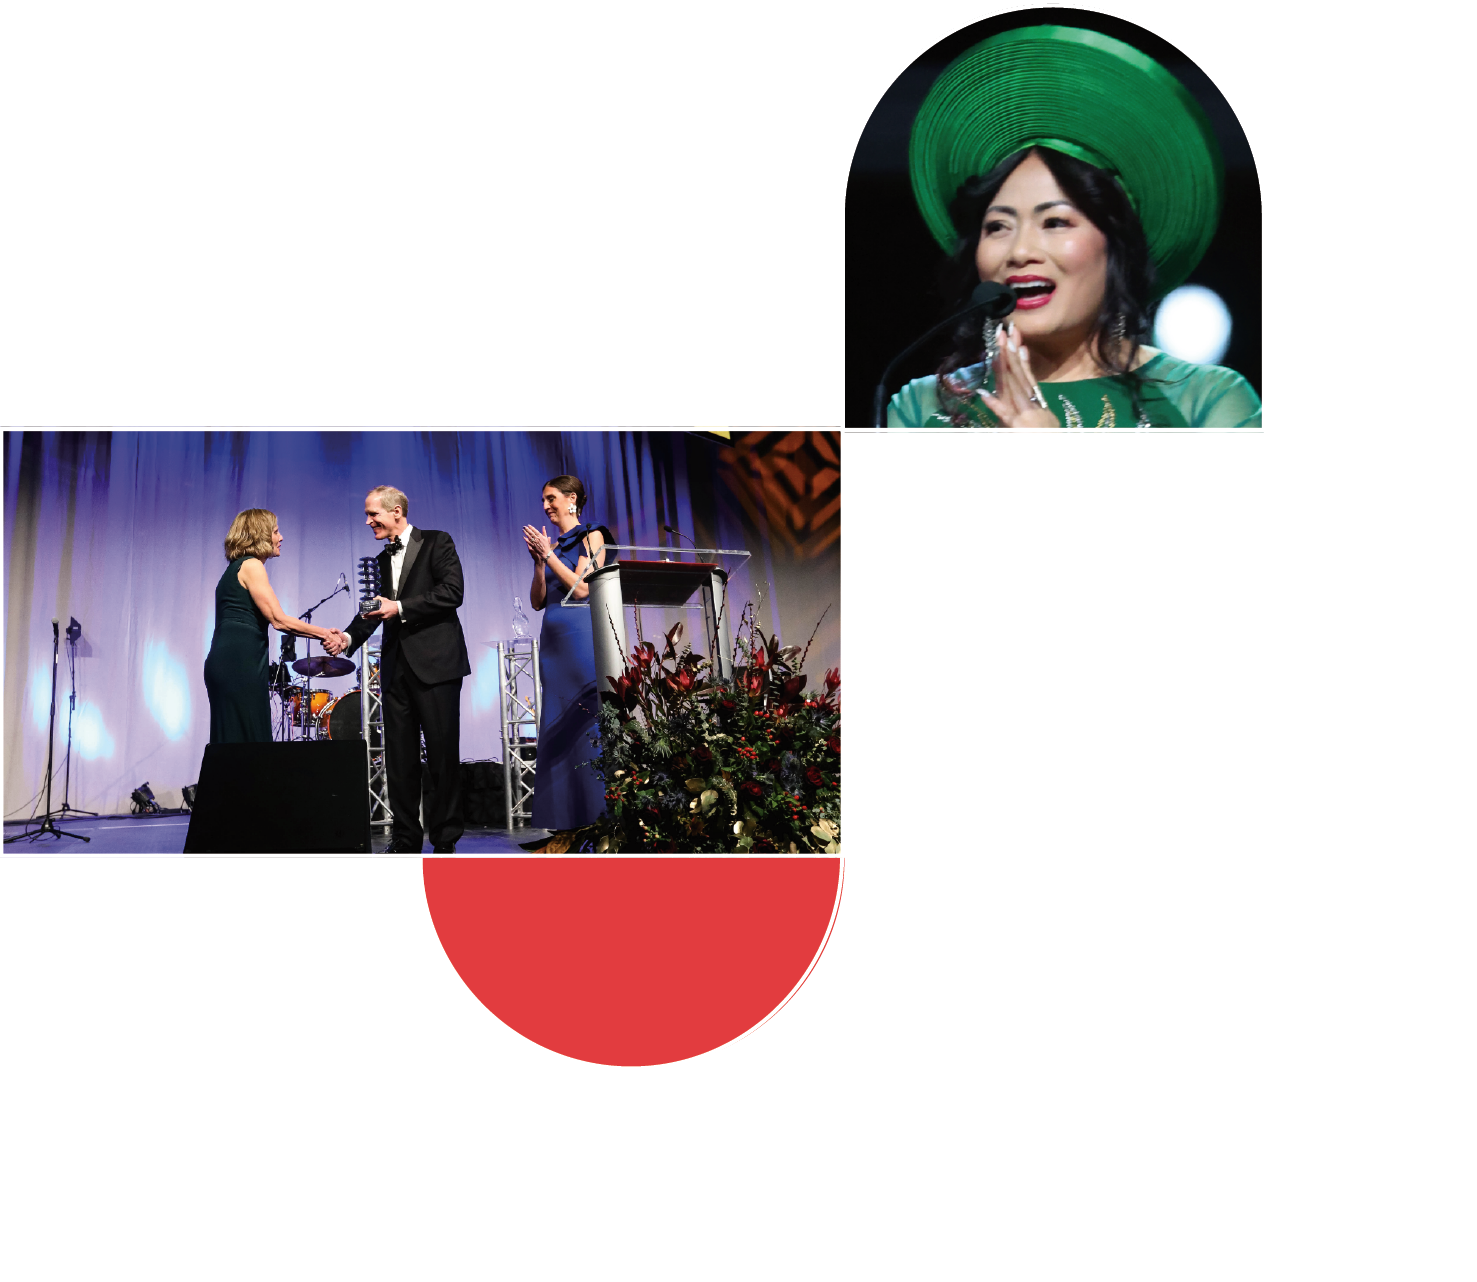 A white geometric line pattern with two images from an Awards Gala: a woman in a green hat accepting an award; and an image of a women in a black dress accepting an award from a man in a black tuxedo on a stage with flowers